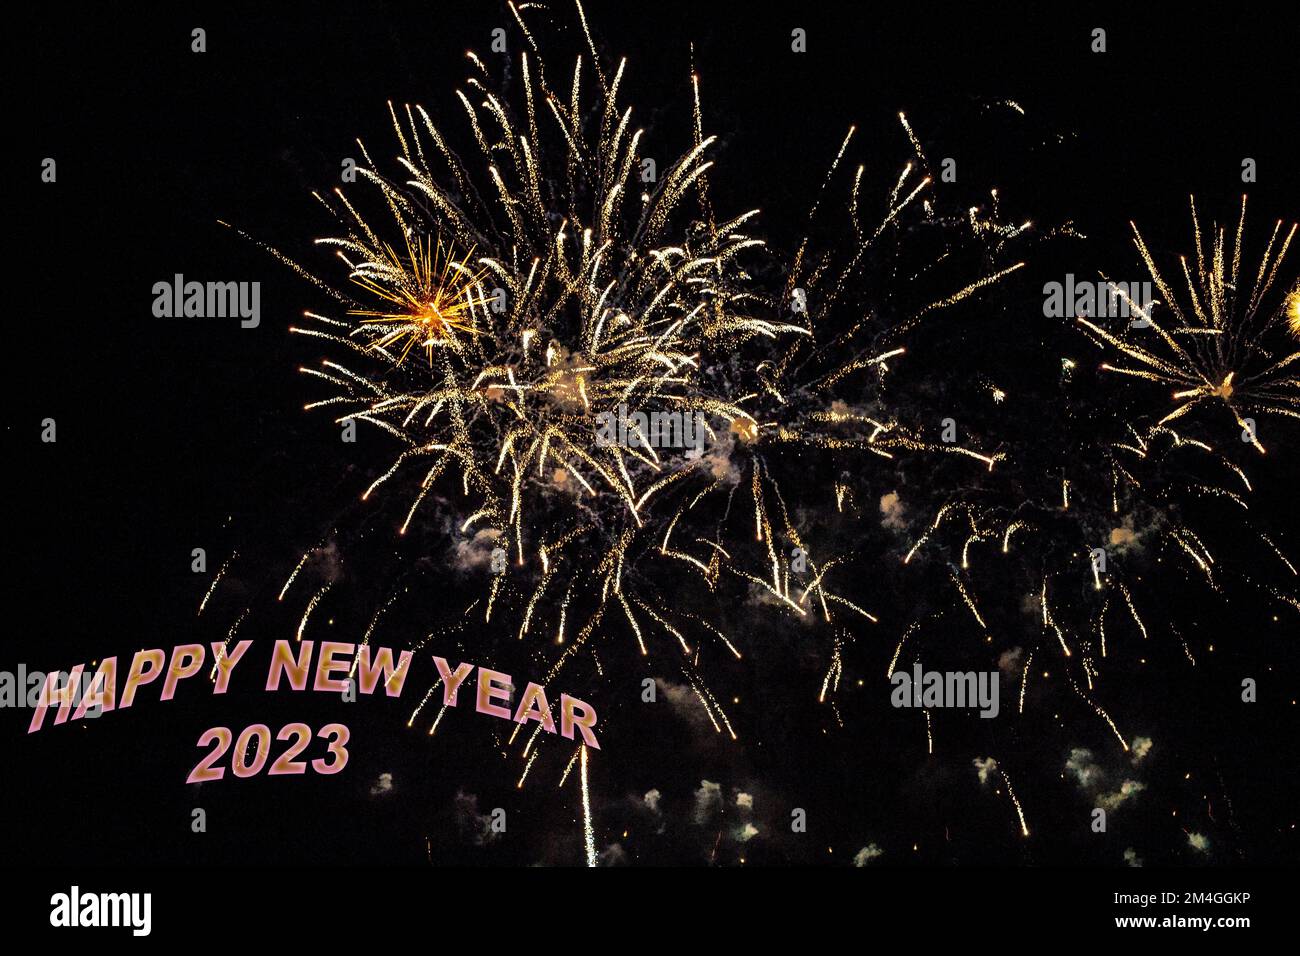 Fireworks to congratulate the new year 2023 with yellow or gold letters Stock Photo